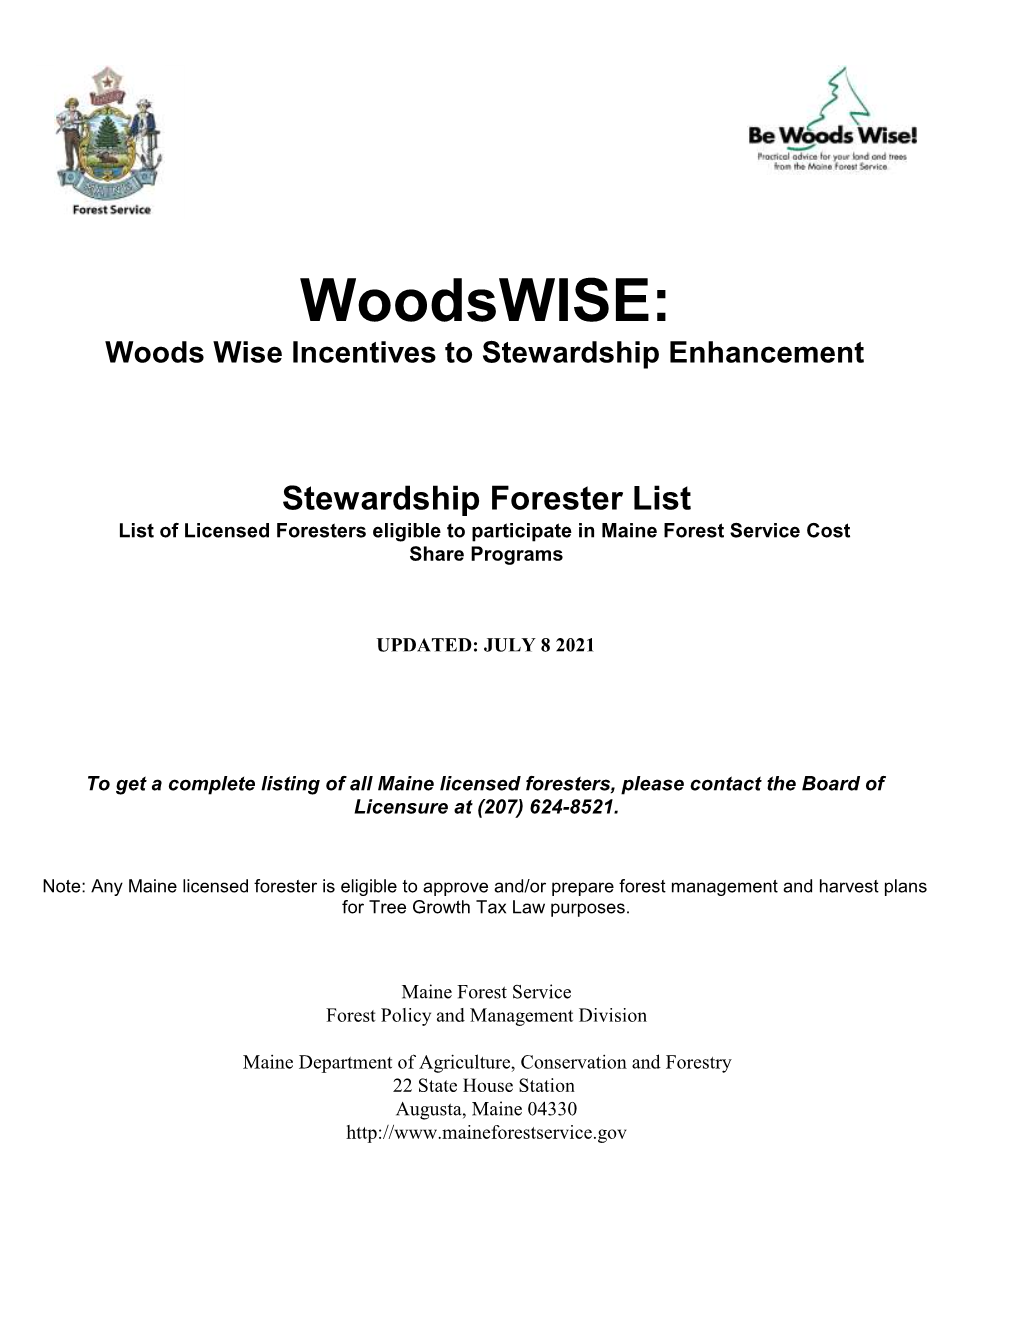 Stewardship Forester List List of Licensed Foresters Eligible to Participate in Maine Forest Service Cost Share Programs